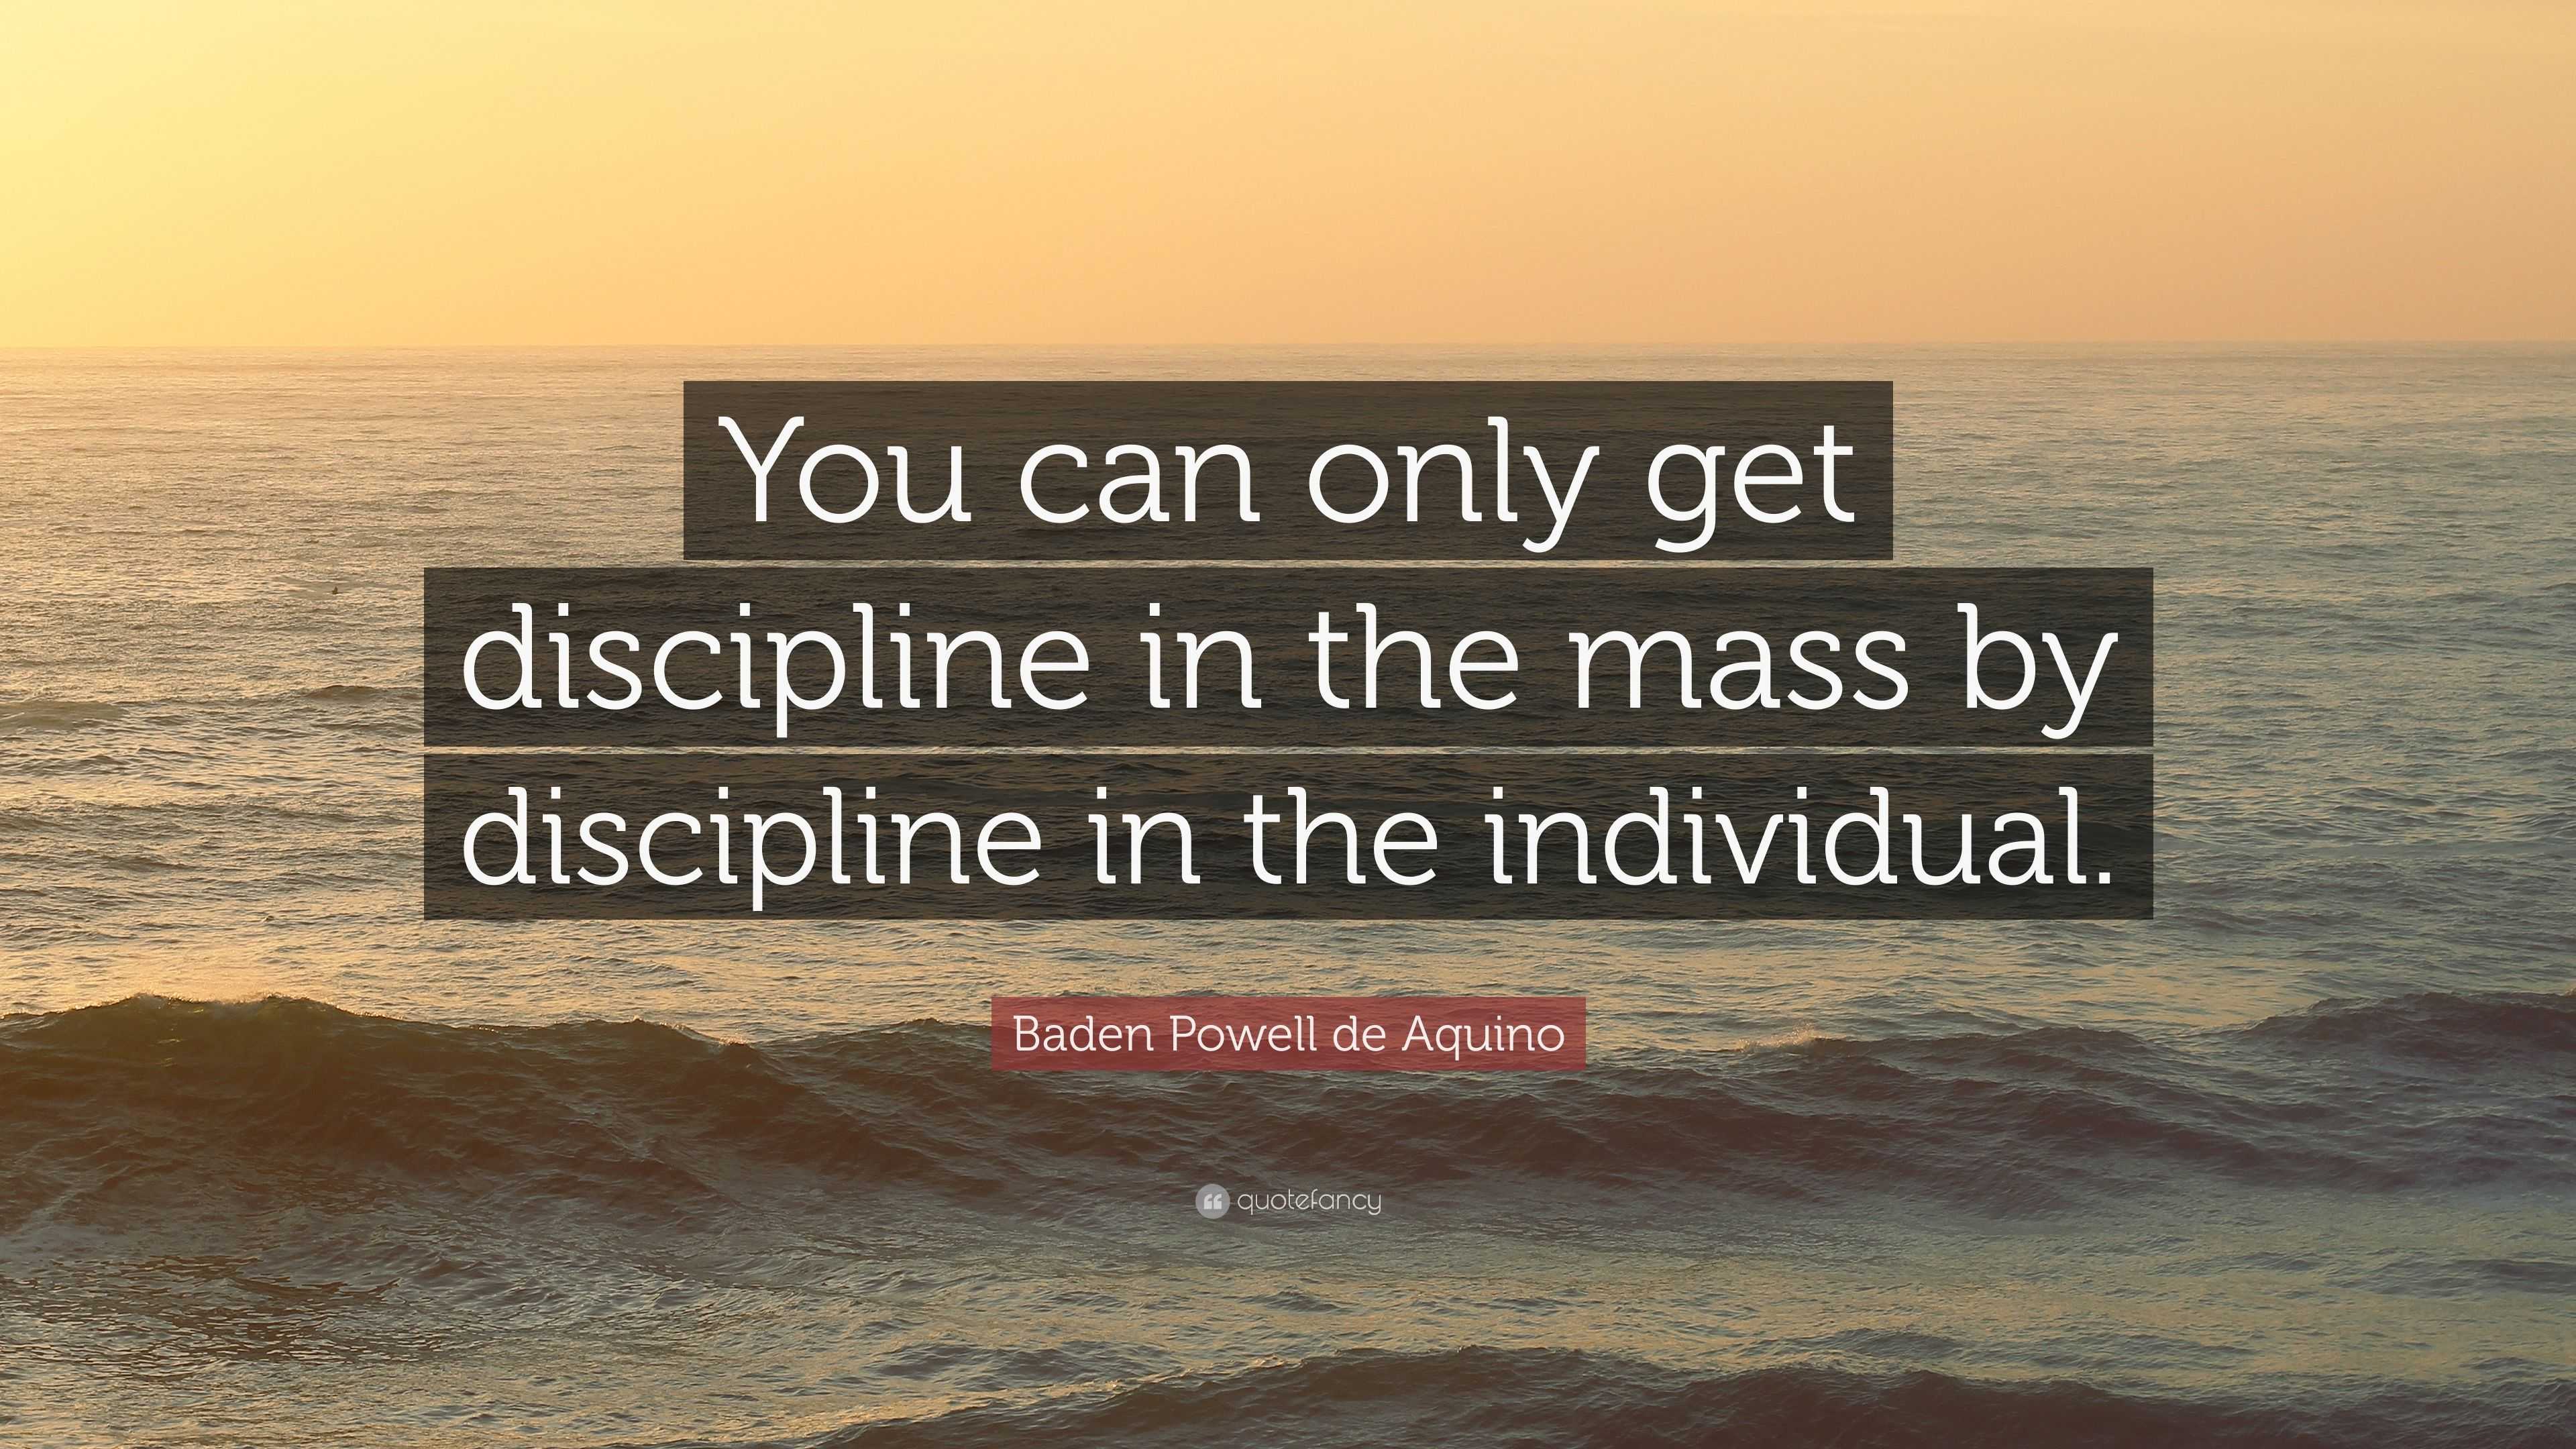 Baden Powell de Aquino Quote: “You can only get discipline in the mass ...